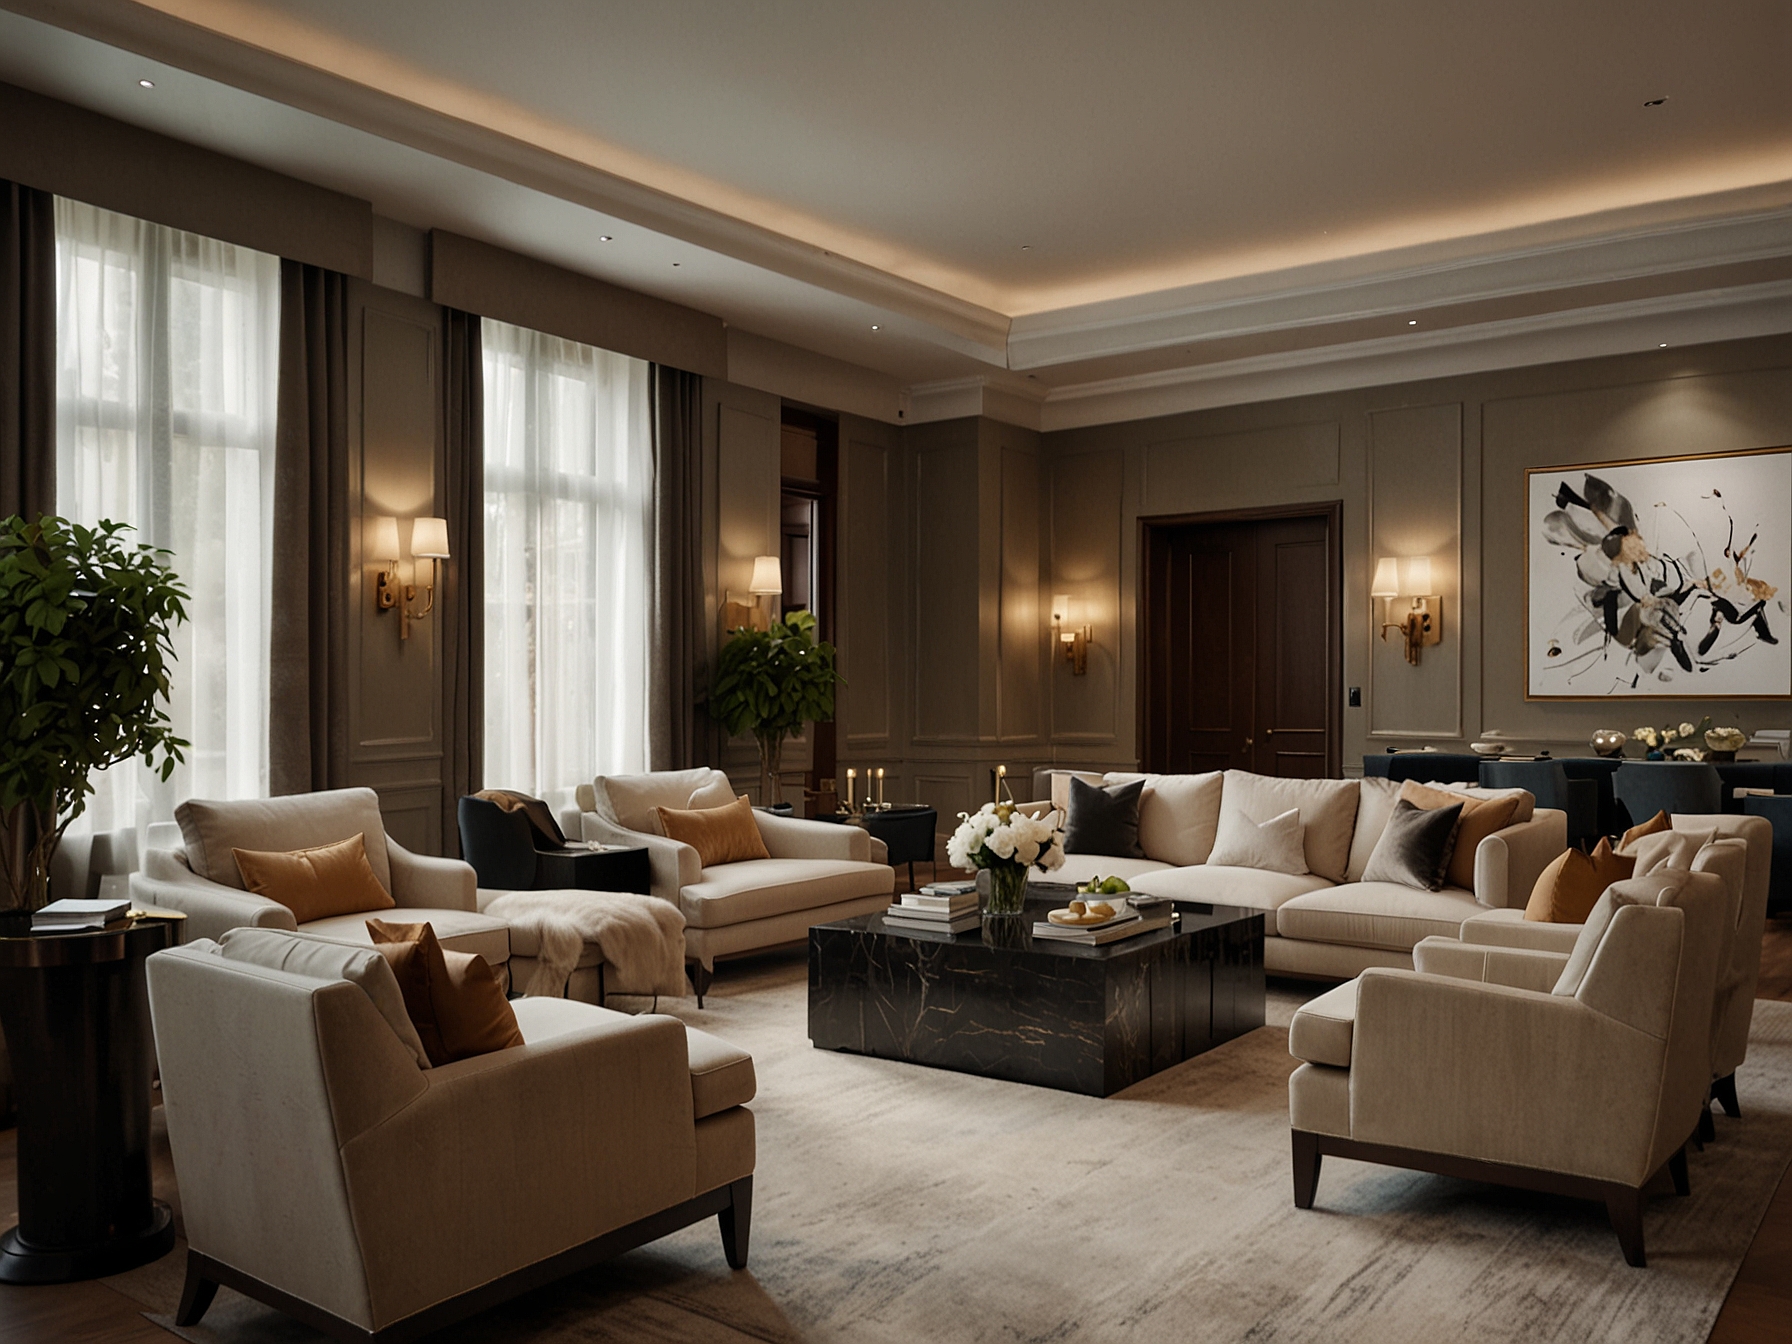 The elegant resident’s lounge at 9 Mulberry Square, complete with plush seating and sophisticated décor, ideal for intimate gatherings and fostering community interactions.